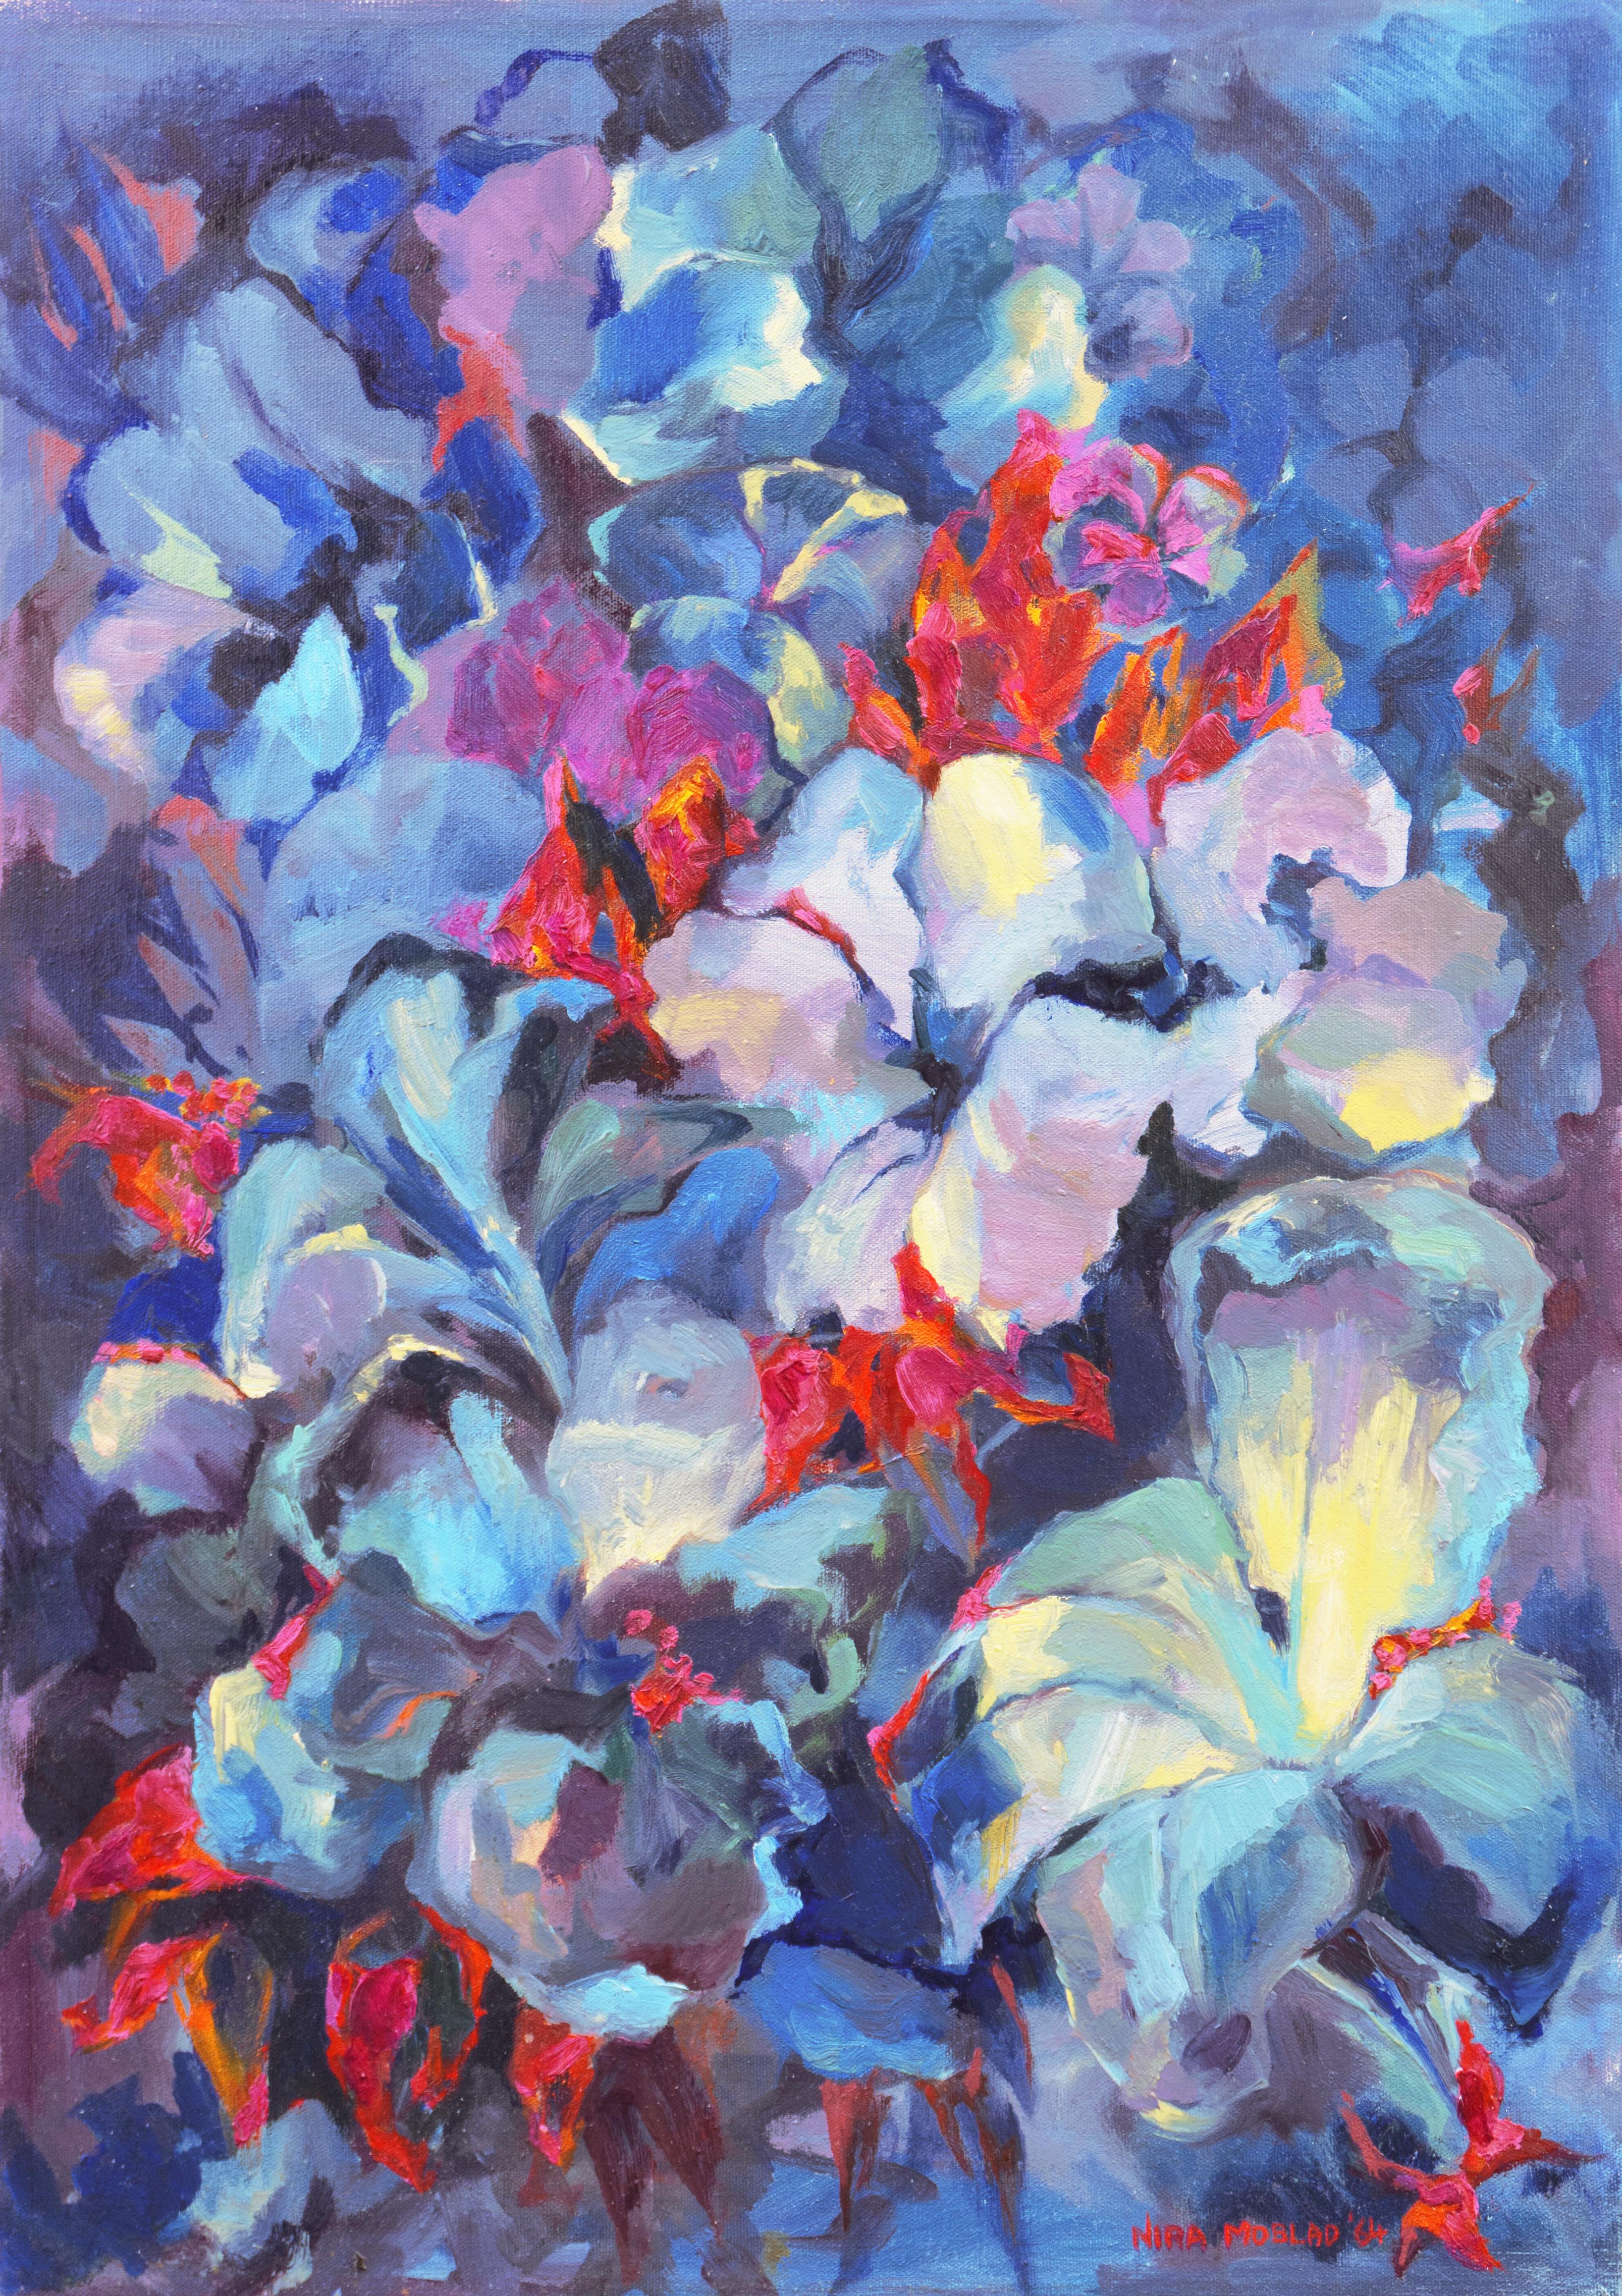 Nira Moblad Abstract Painting - 'Floral Abstract, Blue and Coral', Post-Impressionist Still Life